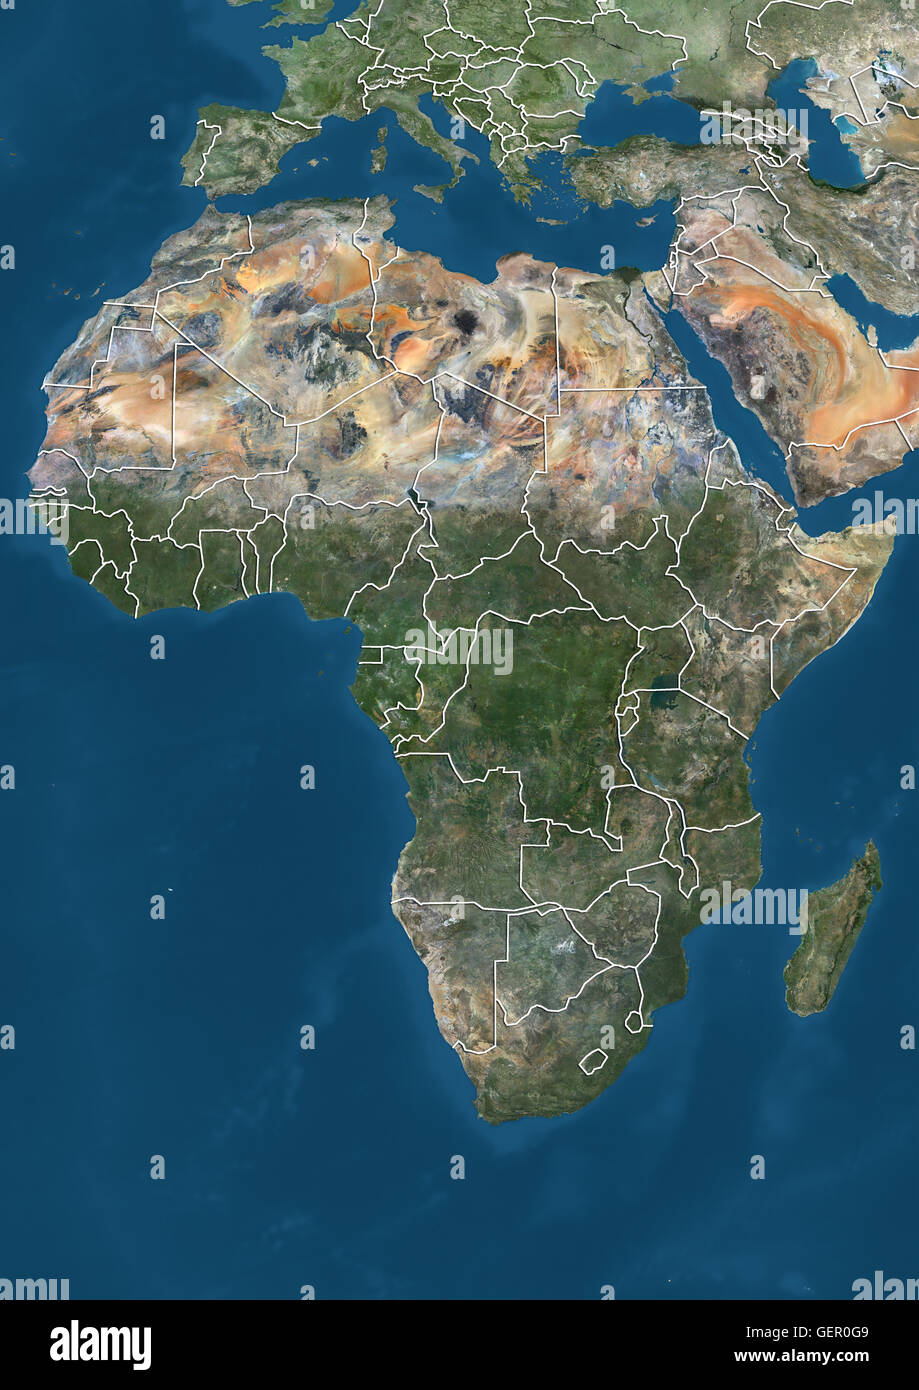 satellite-view-of-africa-with-country-boundaries-this-image-was-compiled-GER0G9.jpg